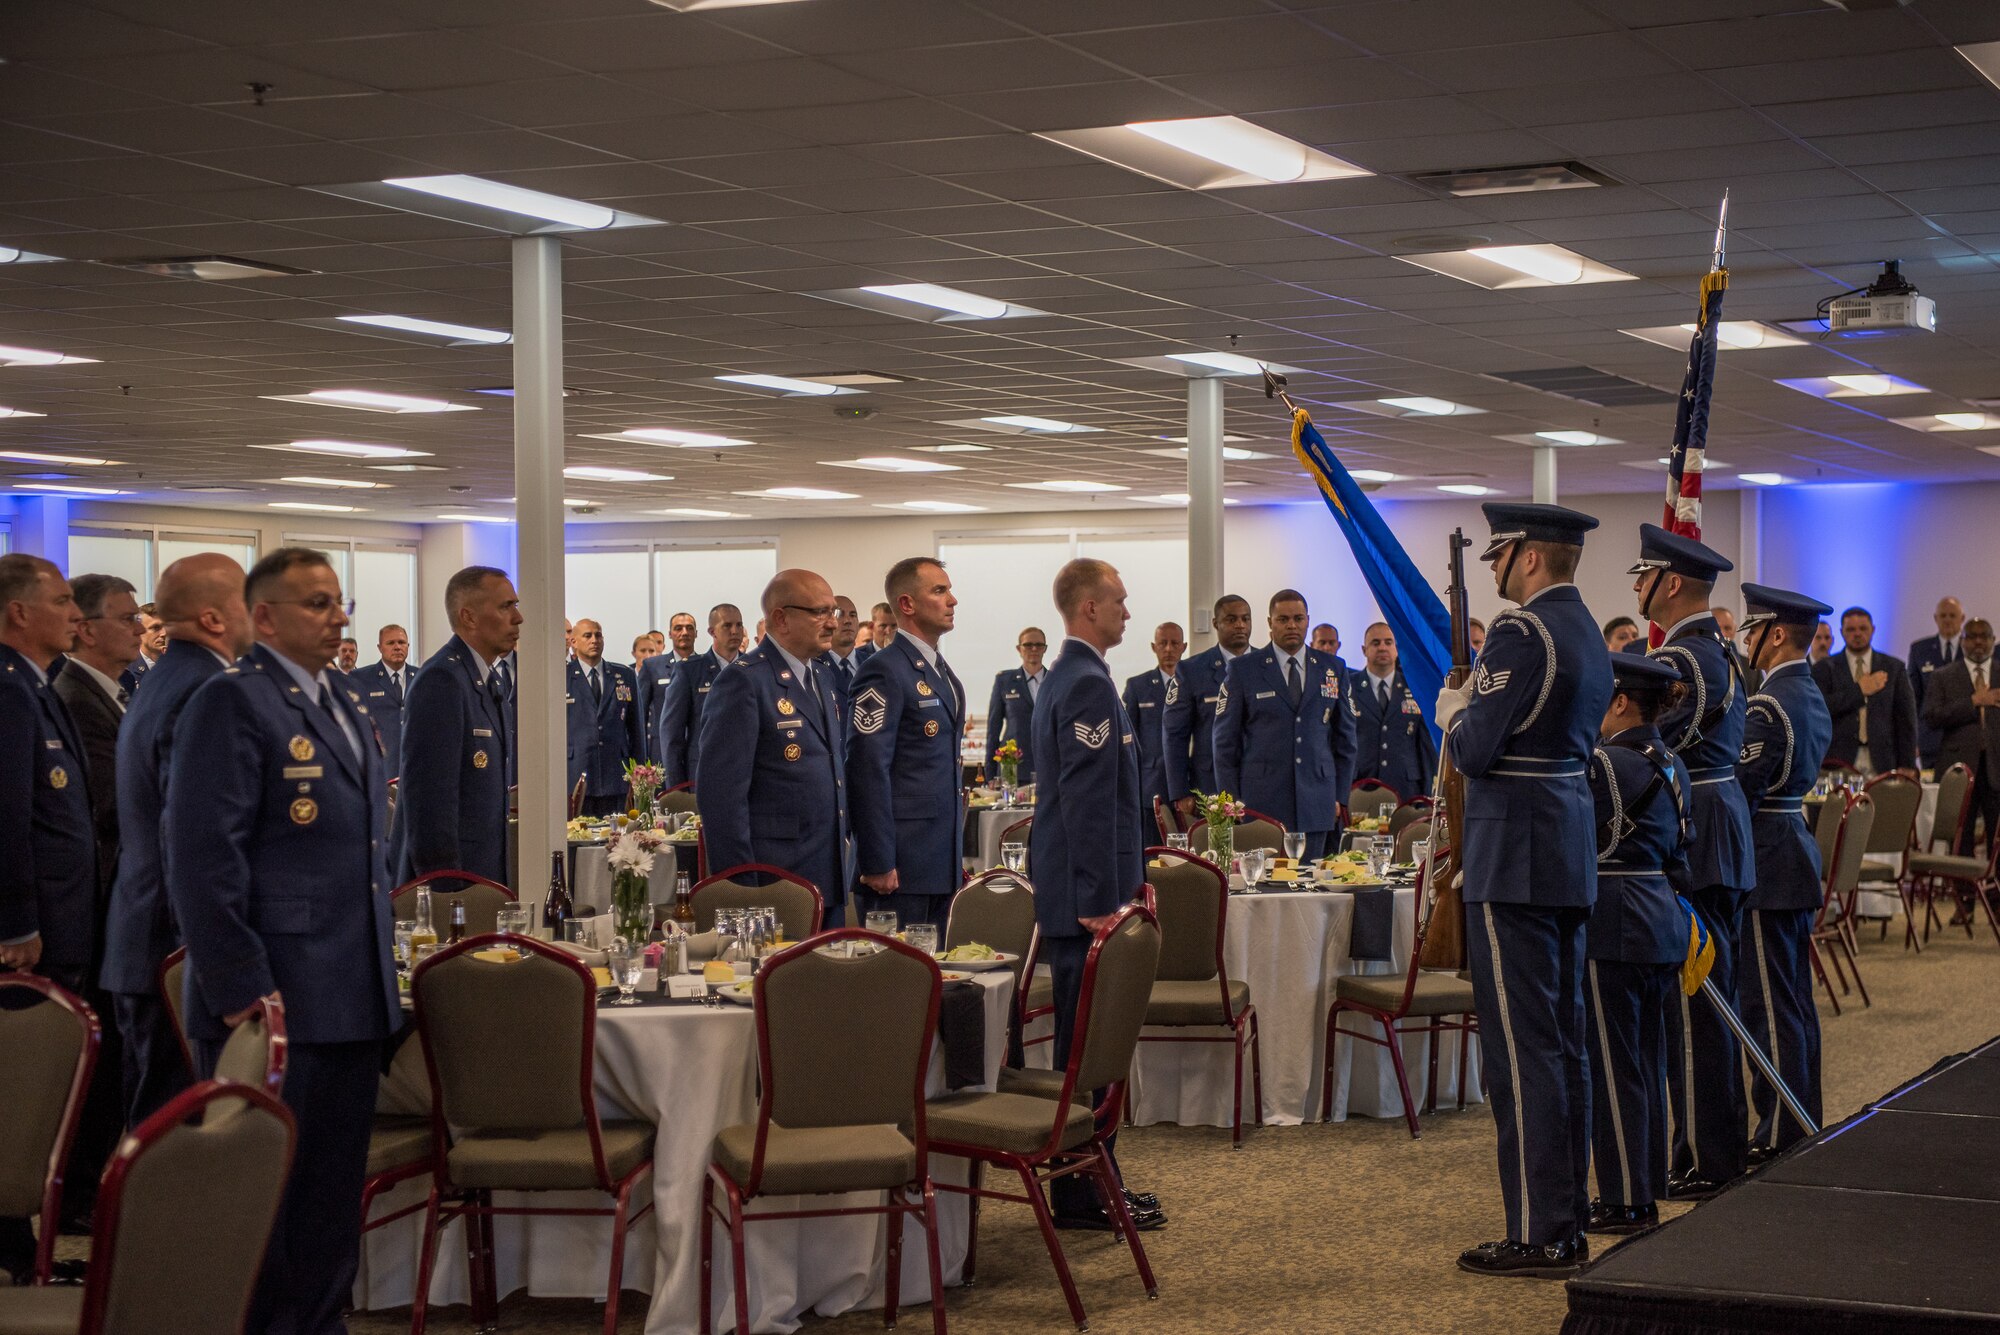 The 137th Special Operations Wing Honor Guard presents the colors at the 2018 Air National Guard Security Forces Squadron Dinner and Awards Banquet at the National Center for Employee Development Conference Center in Norman, Okla., Sept. 12, 2018. Every year, leadership from all of the Air National Guard security forces squadrons meet in one place to discuss past, current and upcoming topics that impact the career field, as well as recognize outstanding security forces Airmen. (U.S. Air National Guard Photo by Staff Sgt. Kasey M. Phipps)